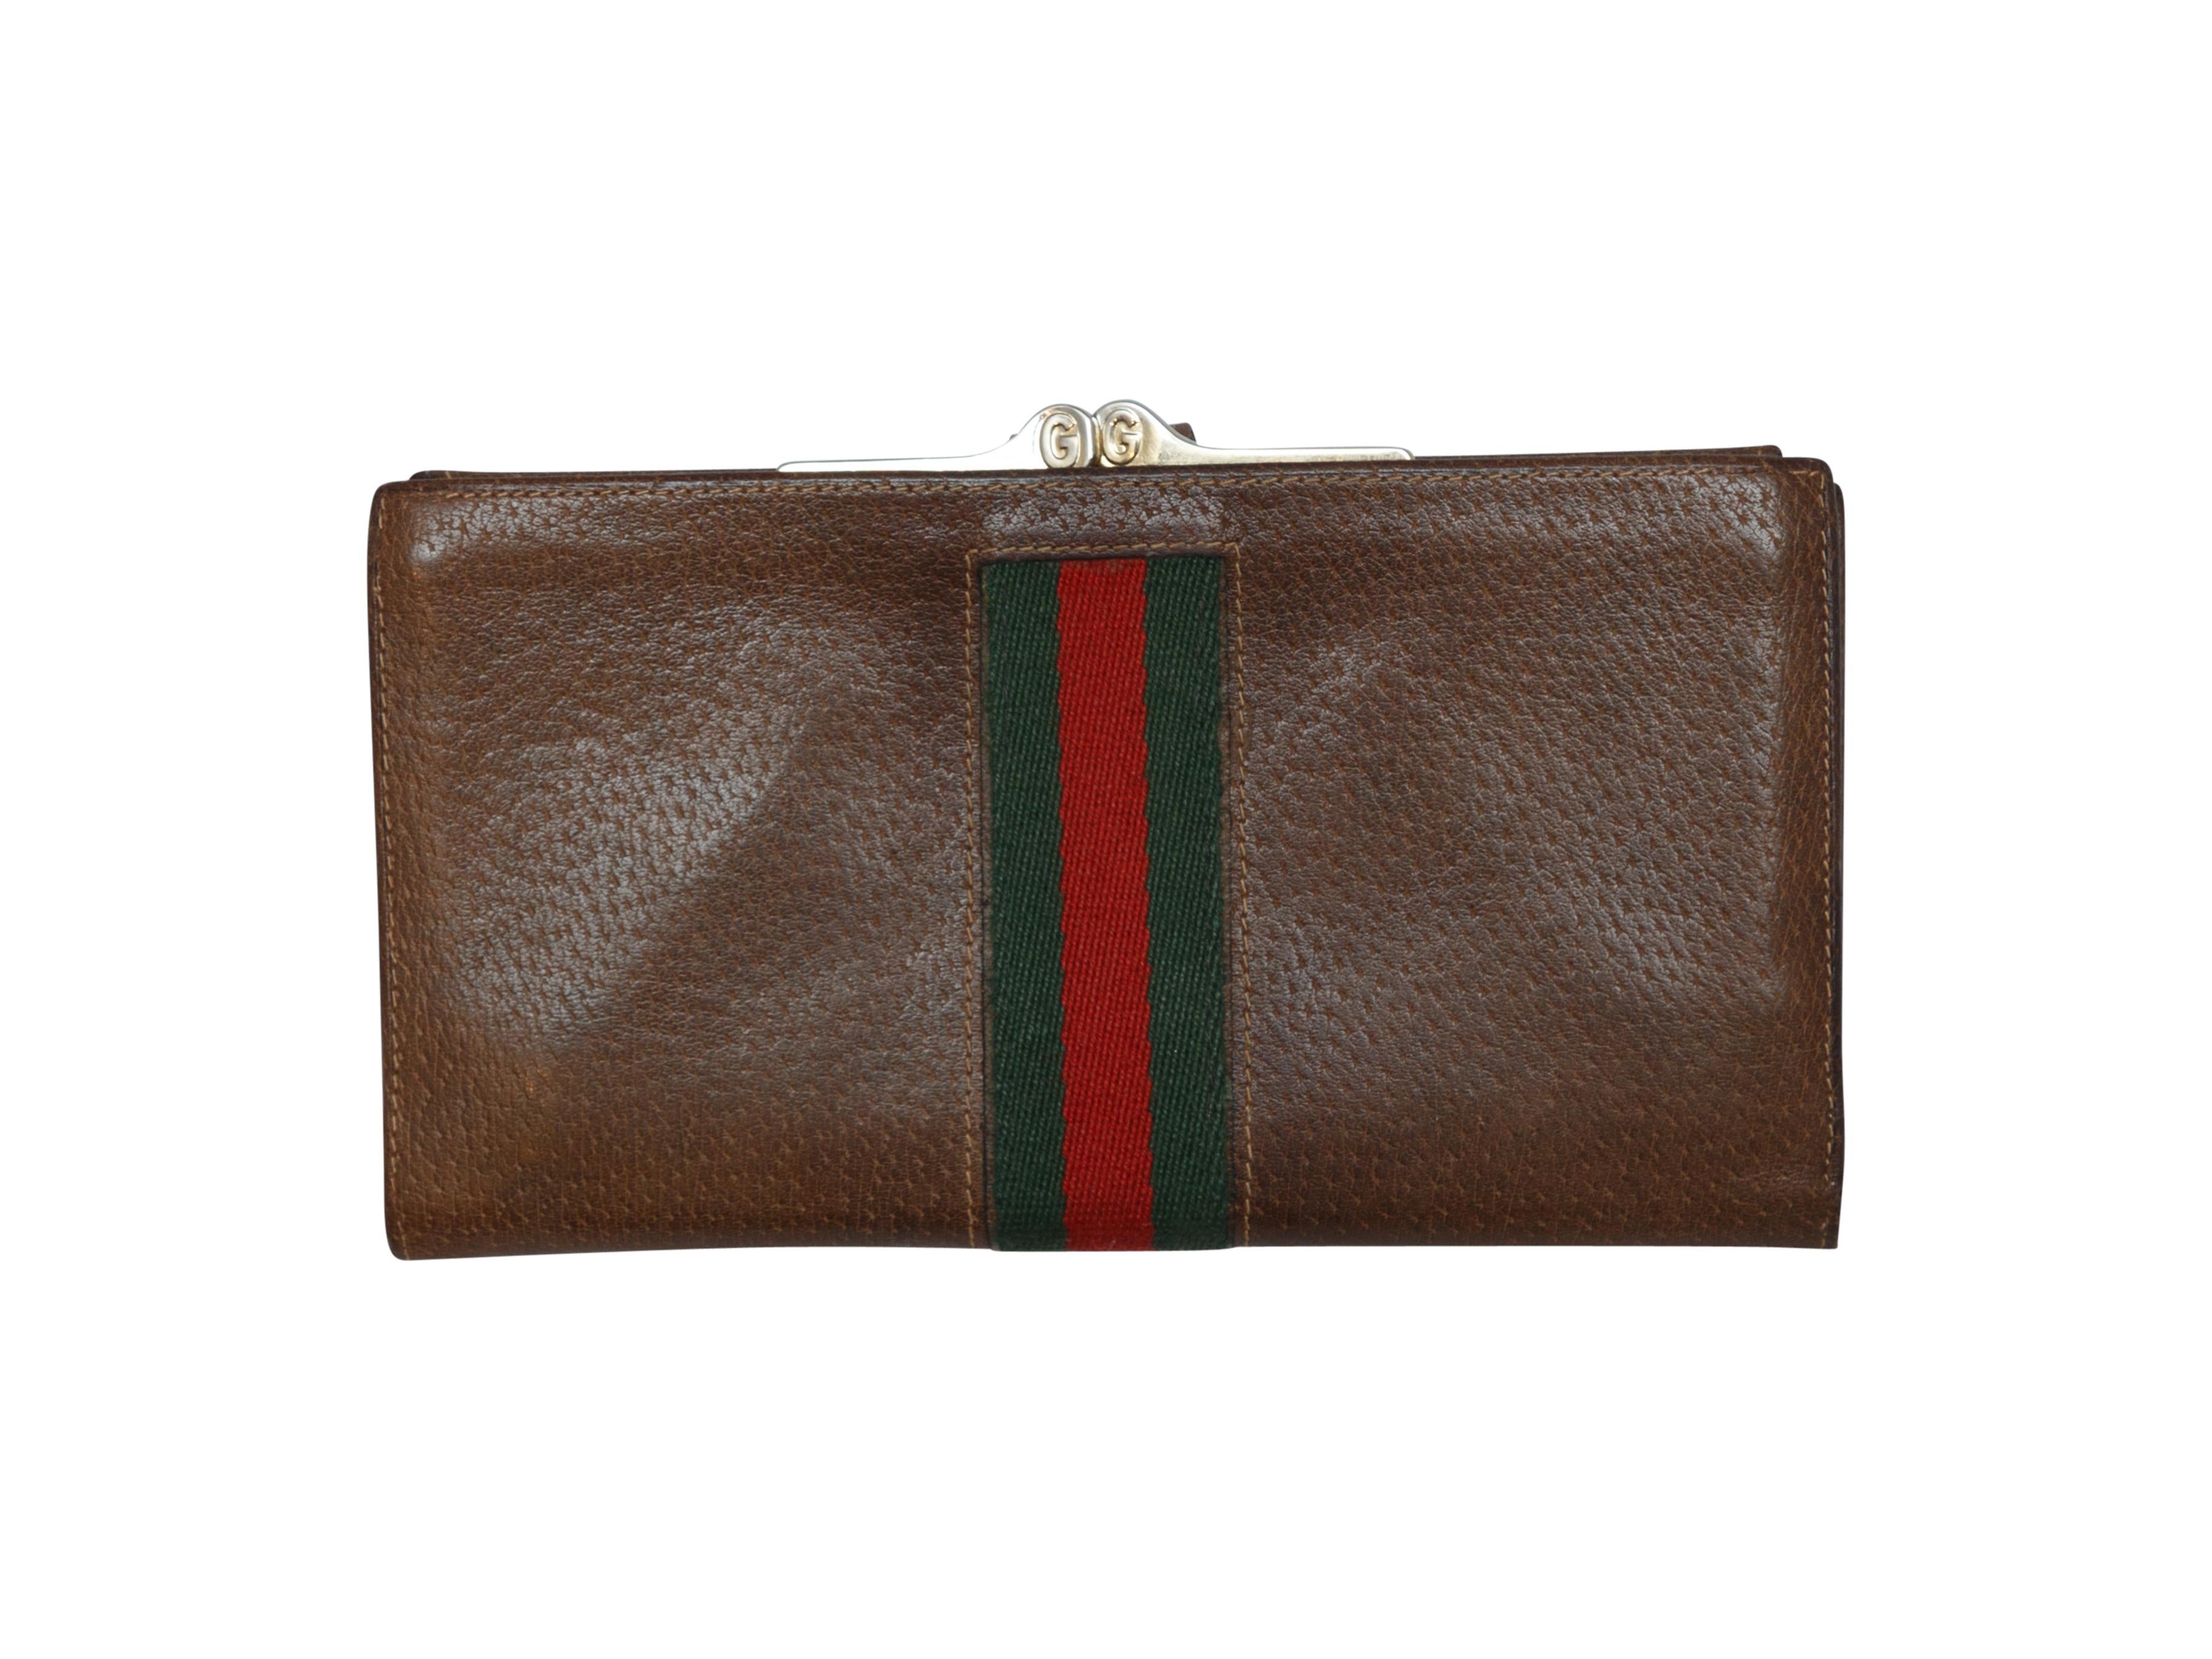 Gucci Brown Leather Web-Accented Wallet 2